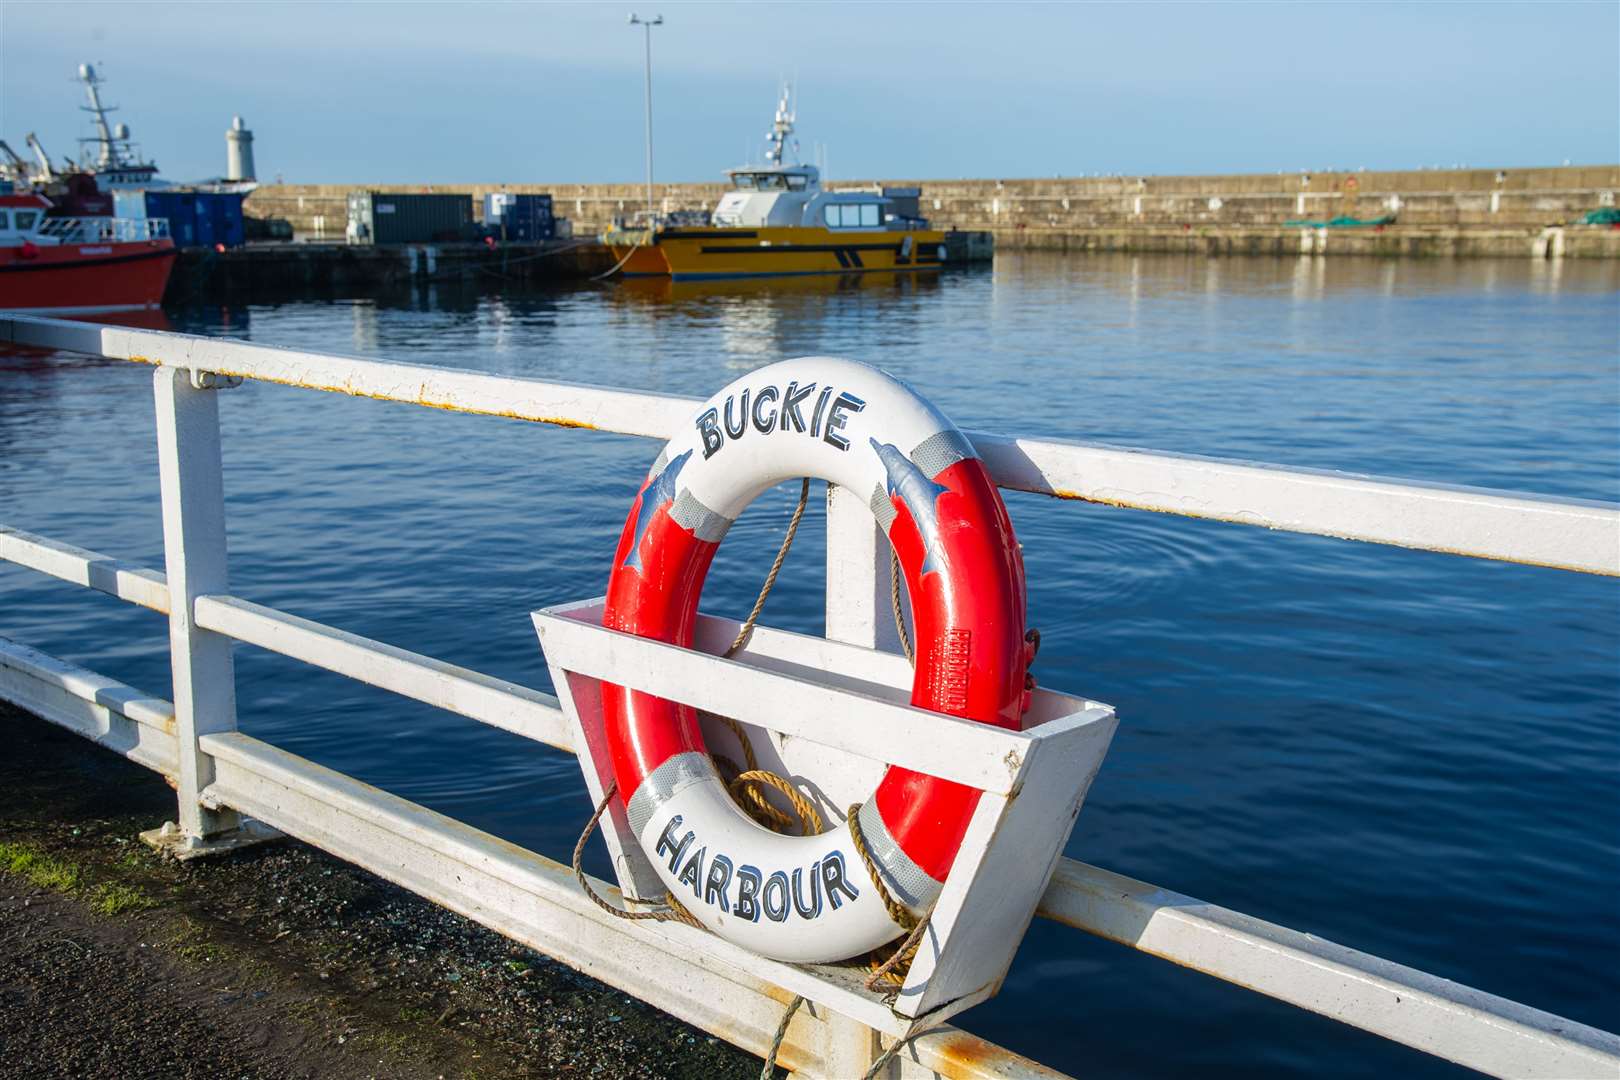 It was a quieter week on the fish landings front at Buckie Harbour in the run up to Christmas. Picture: Daniel Forsyth